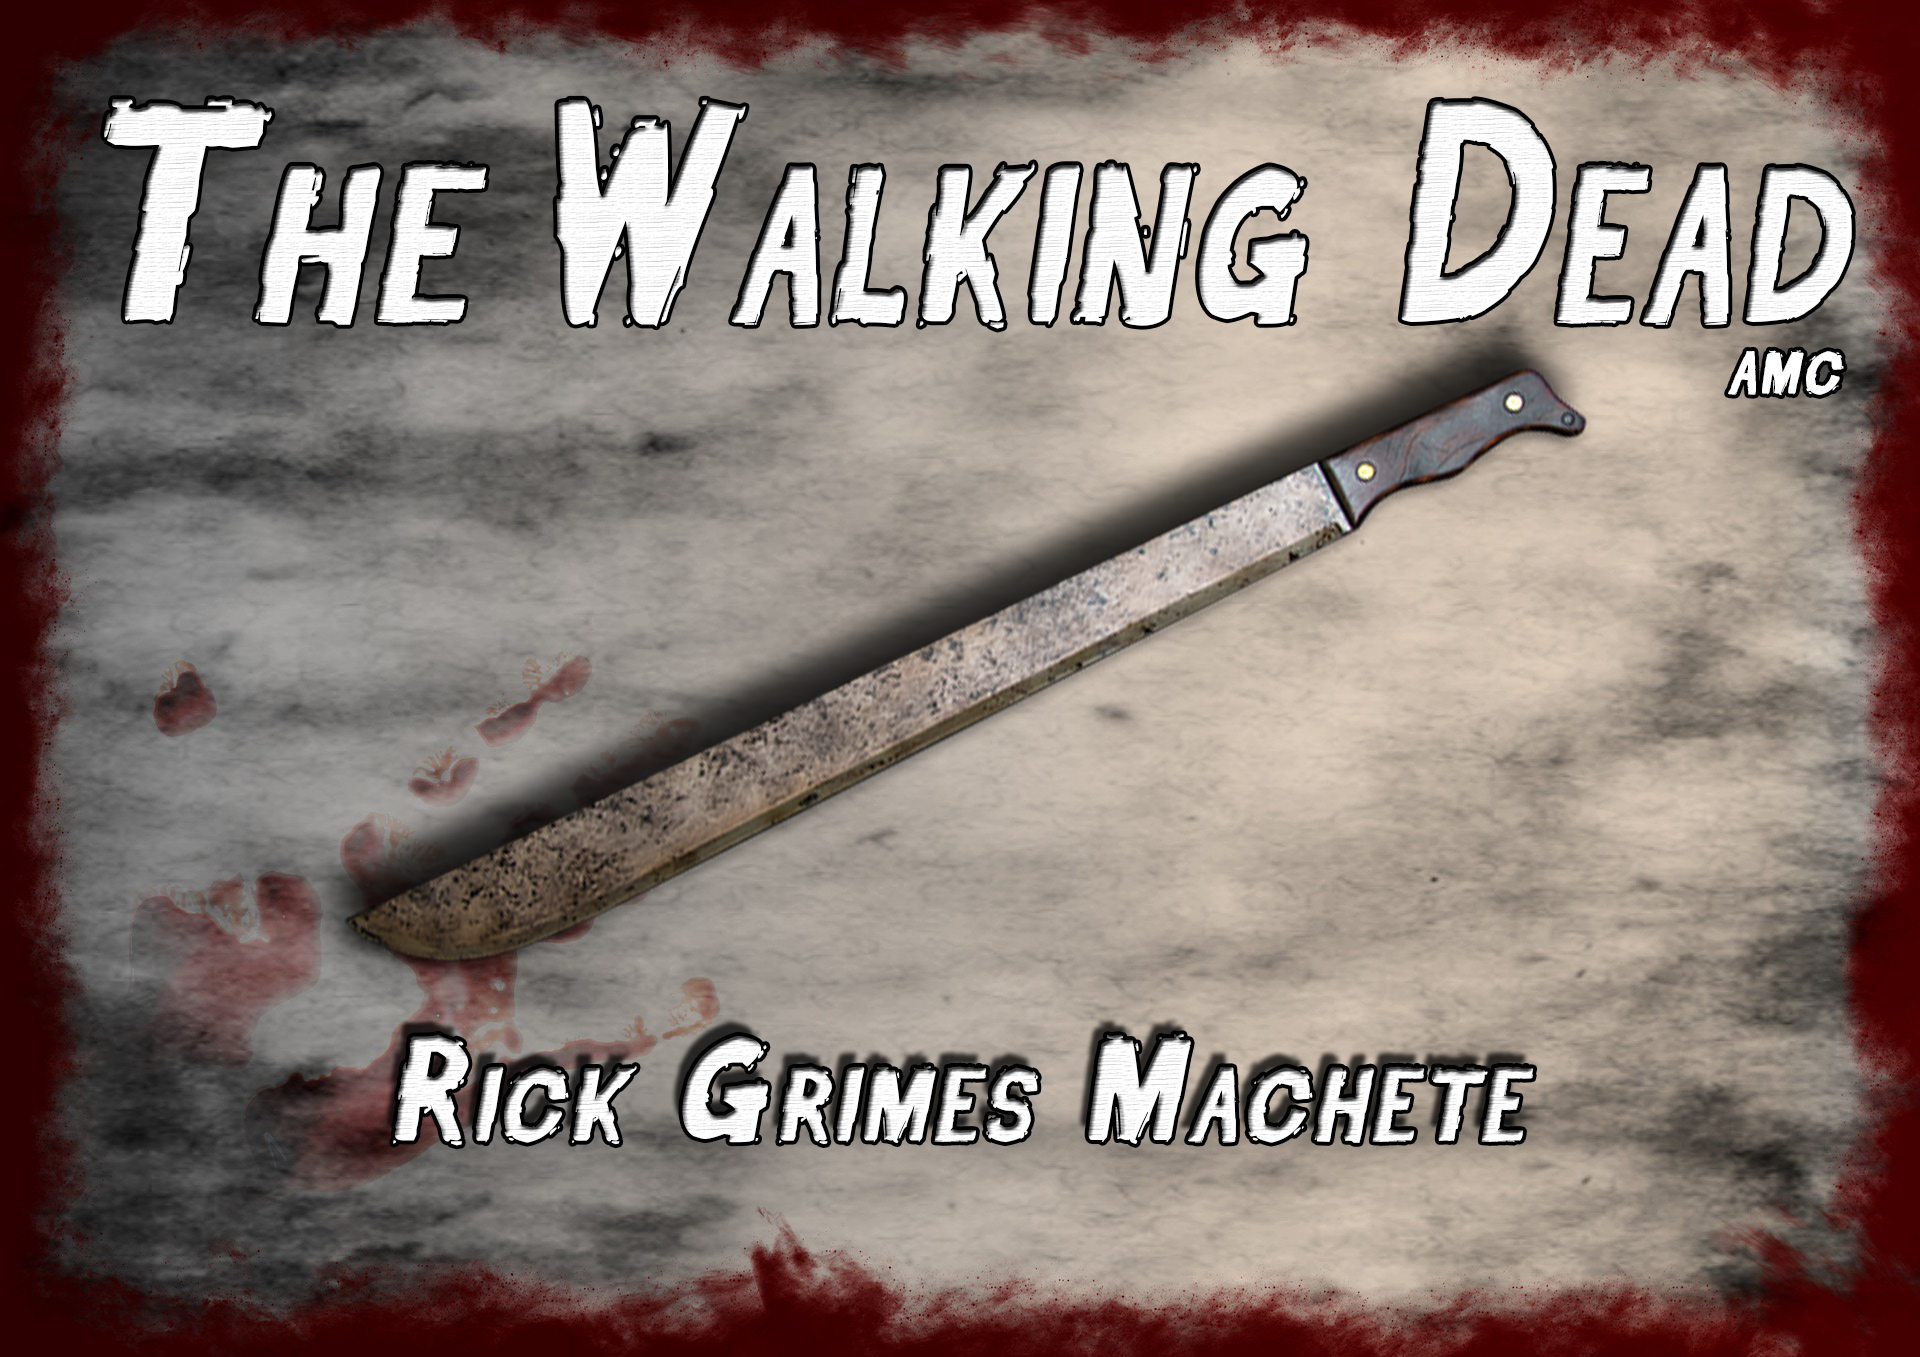 AMC The Walking Dead Rick Grimes Machete. Most realistic zombie killing prop to be found